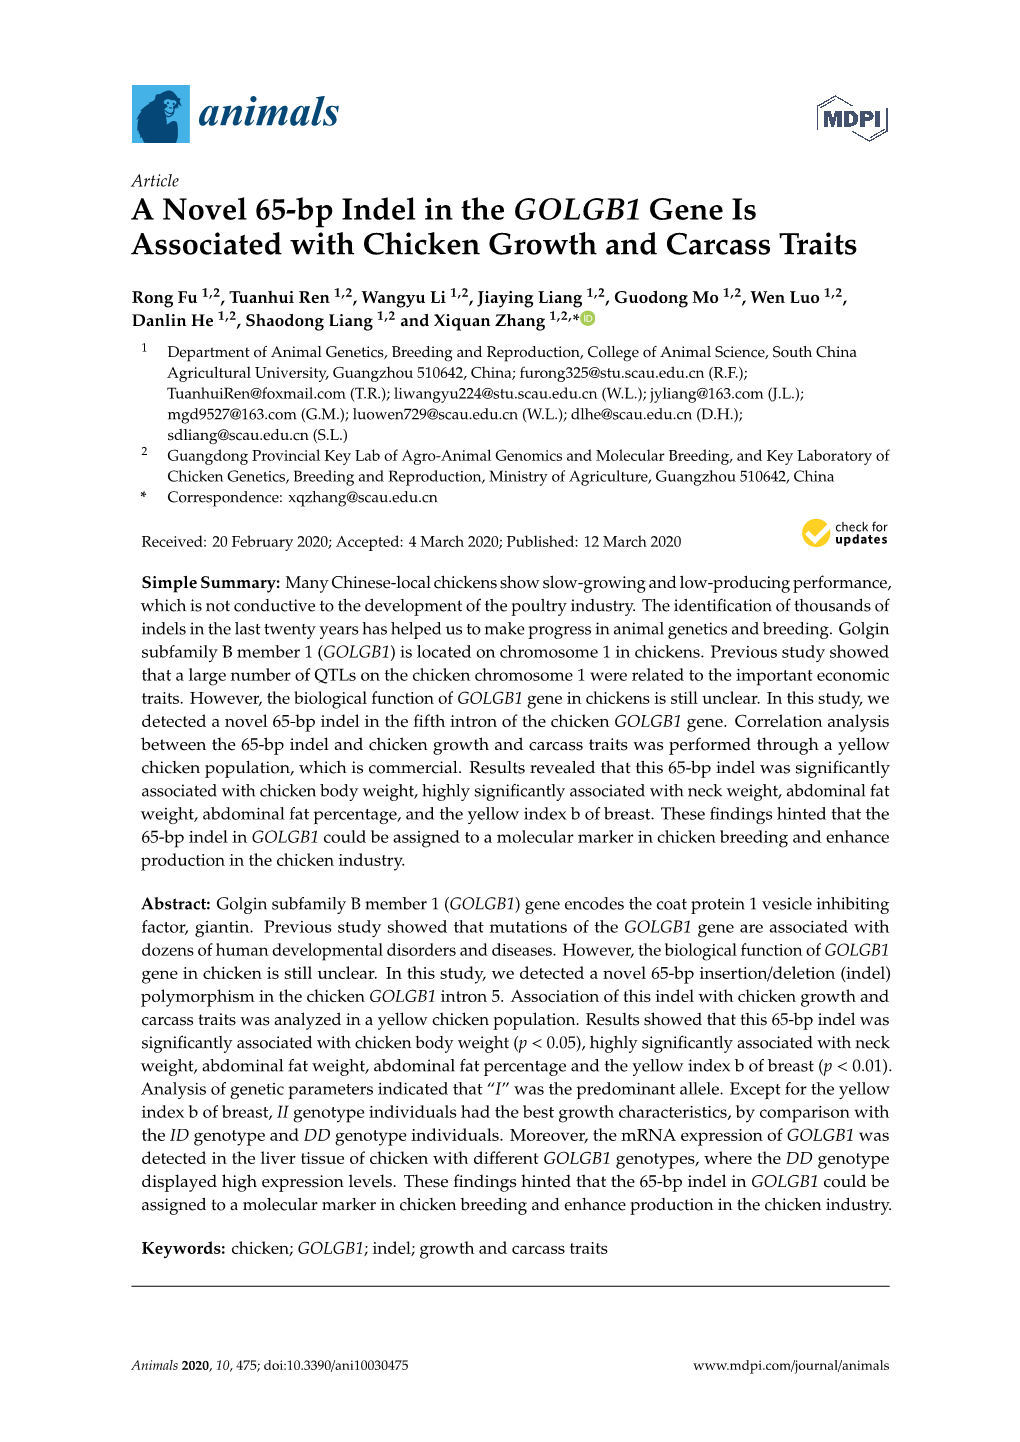 A Novel 65-Bp Indel in the GOLGB1 Gene Is Associated with Chicken Growth and Carcass Traits